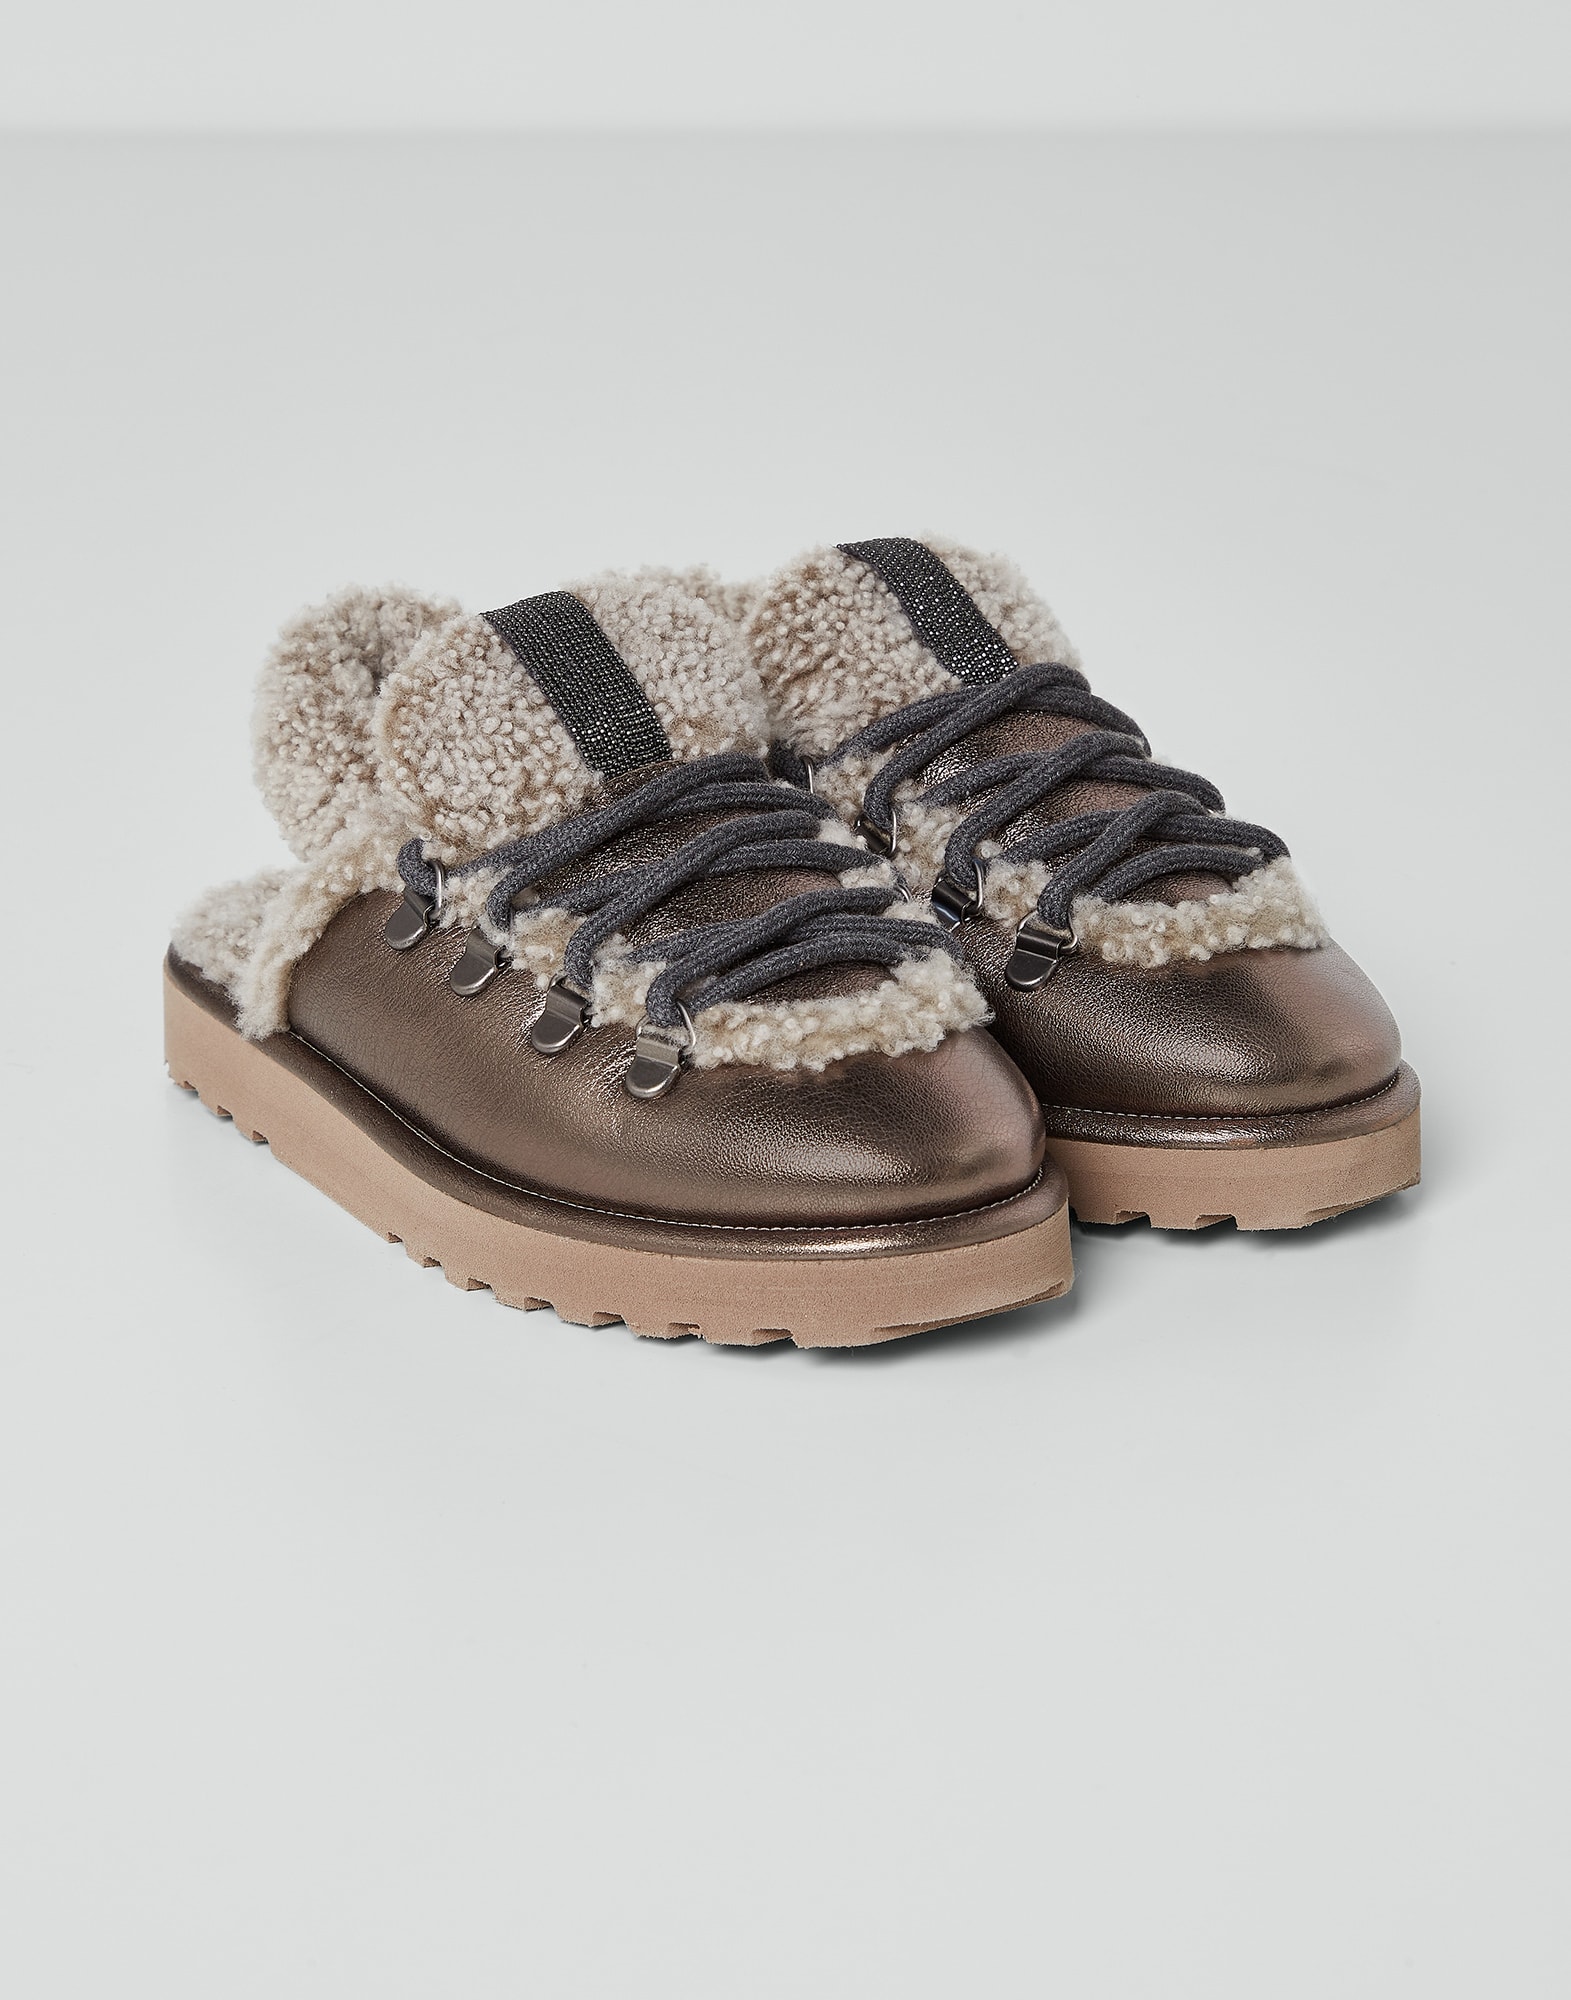 Lamé leather and shearling slippers